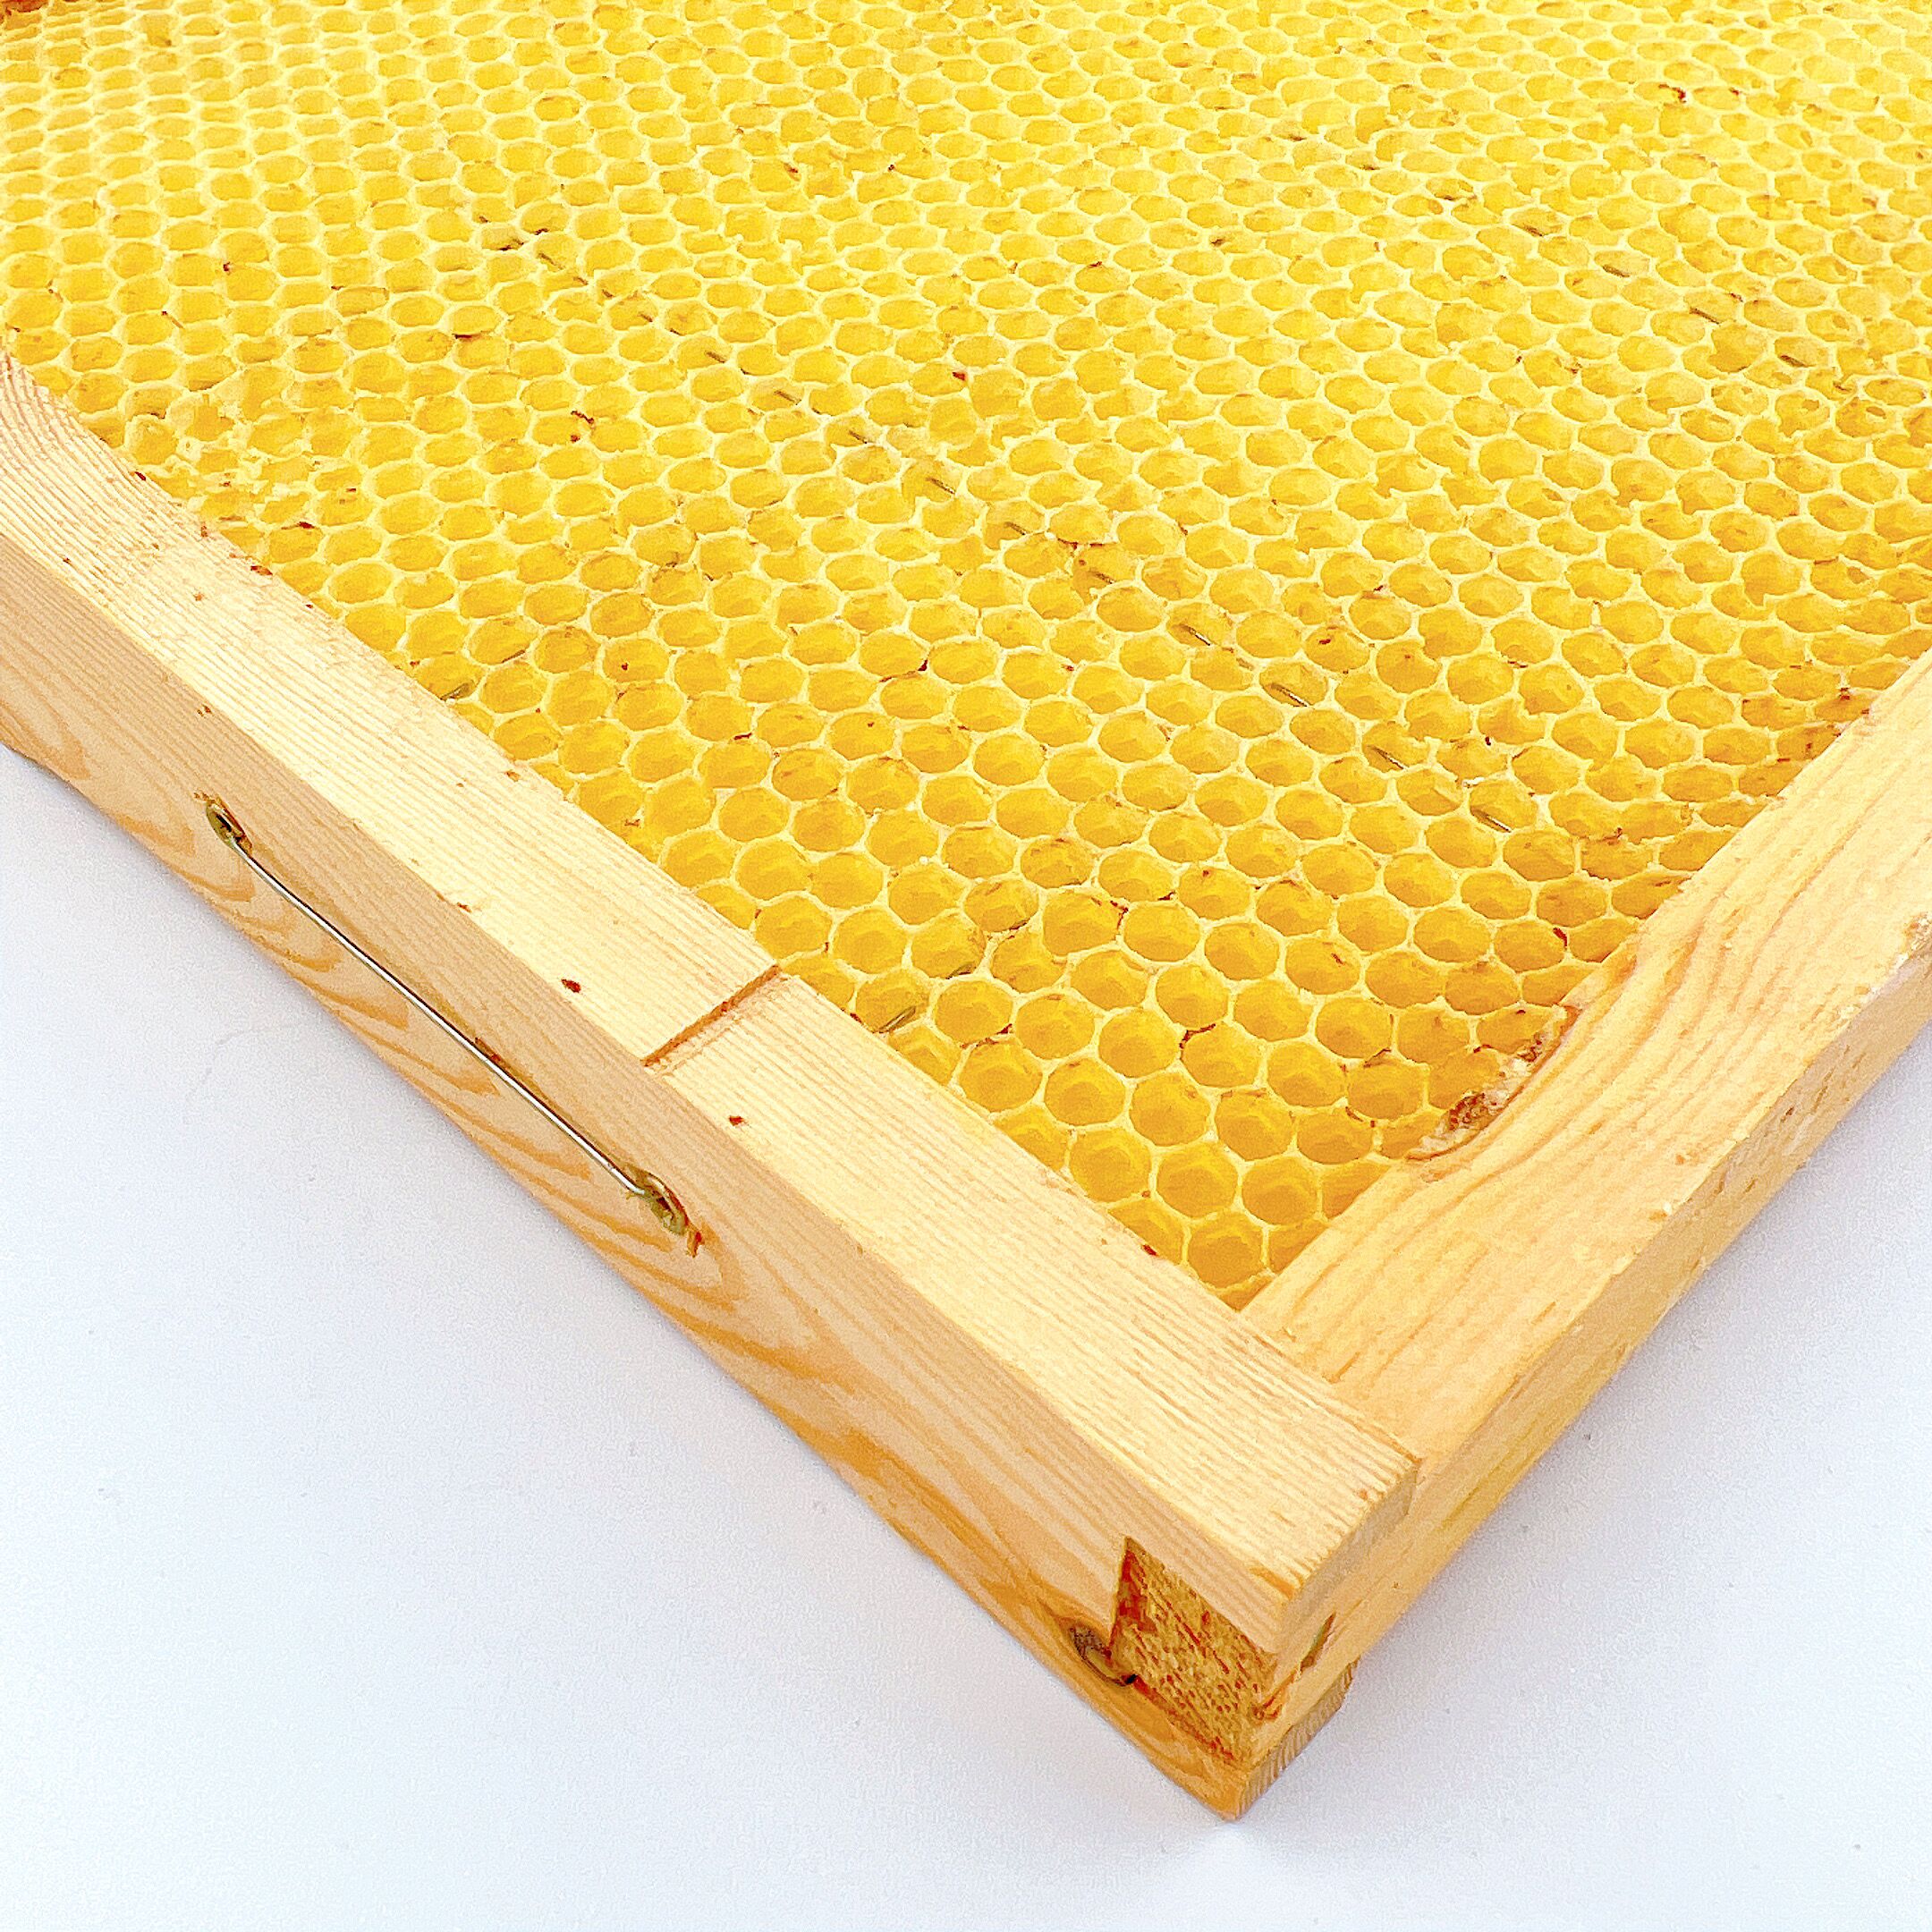 BF-002WH built-in honeycomb by Bee